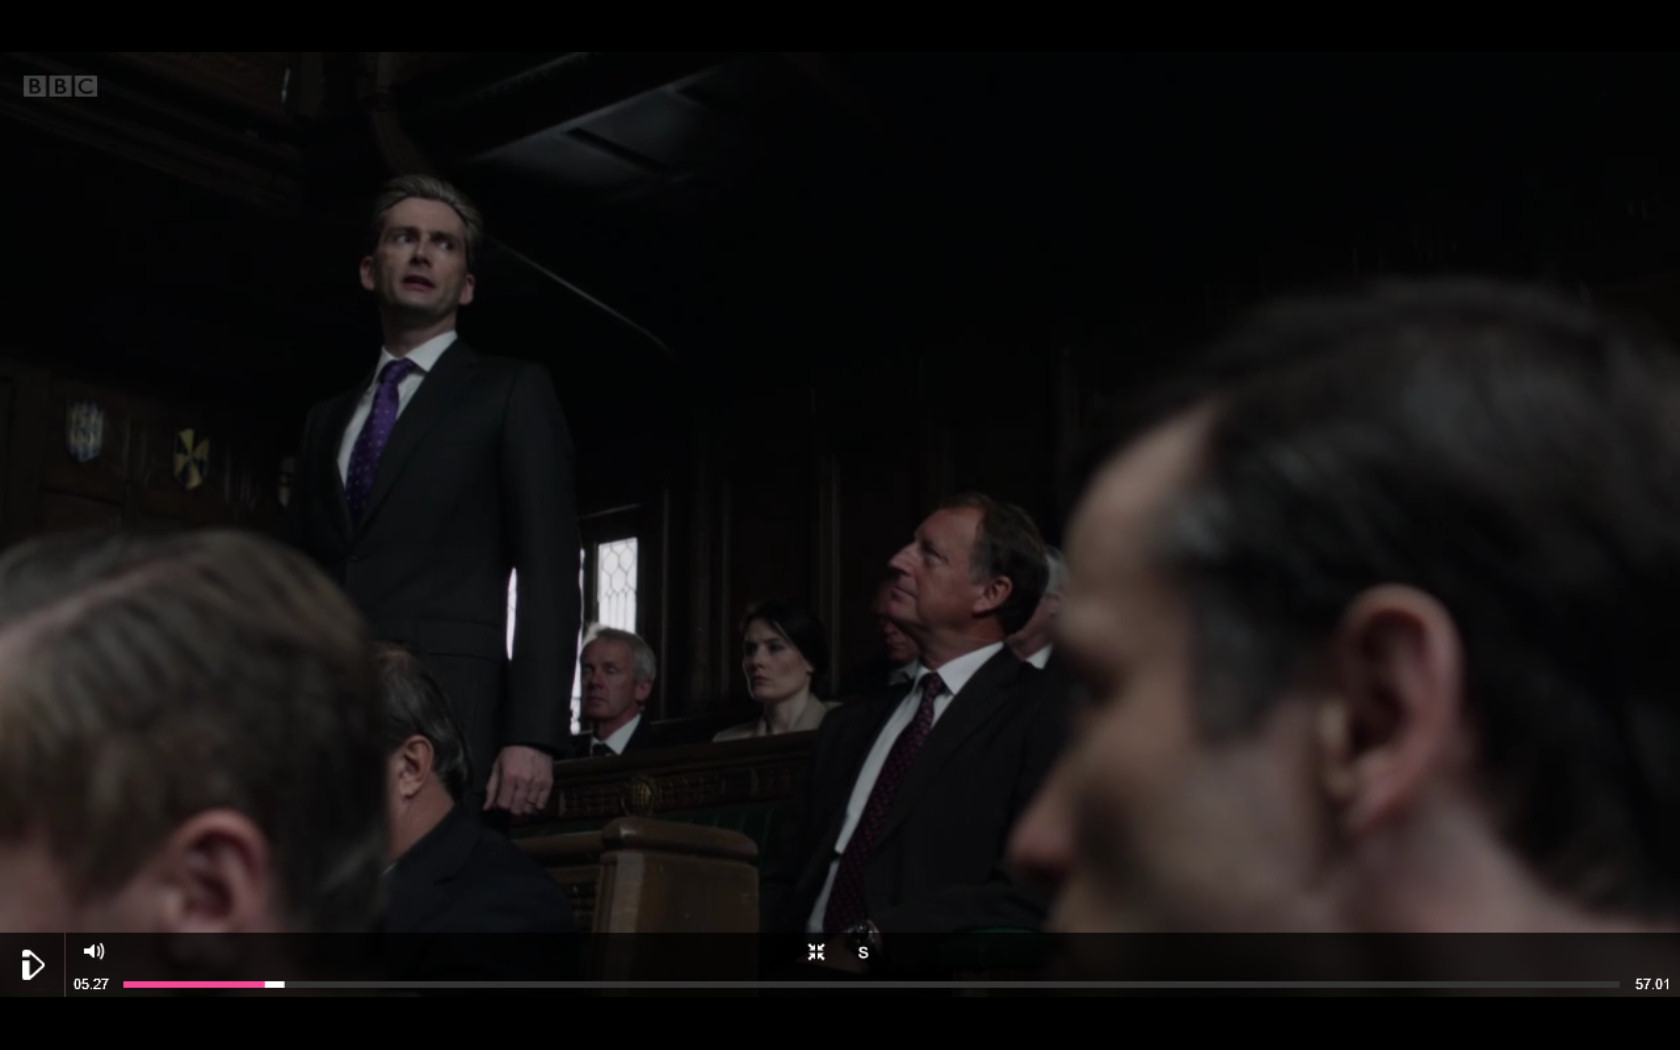 Screen shot from The Politician's Husband with David Tennant.